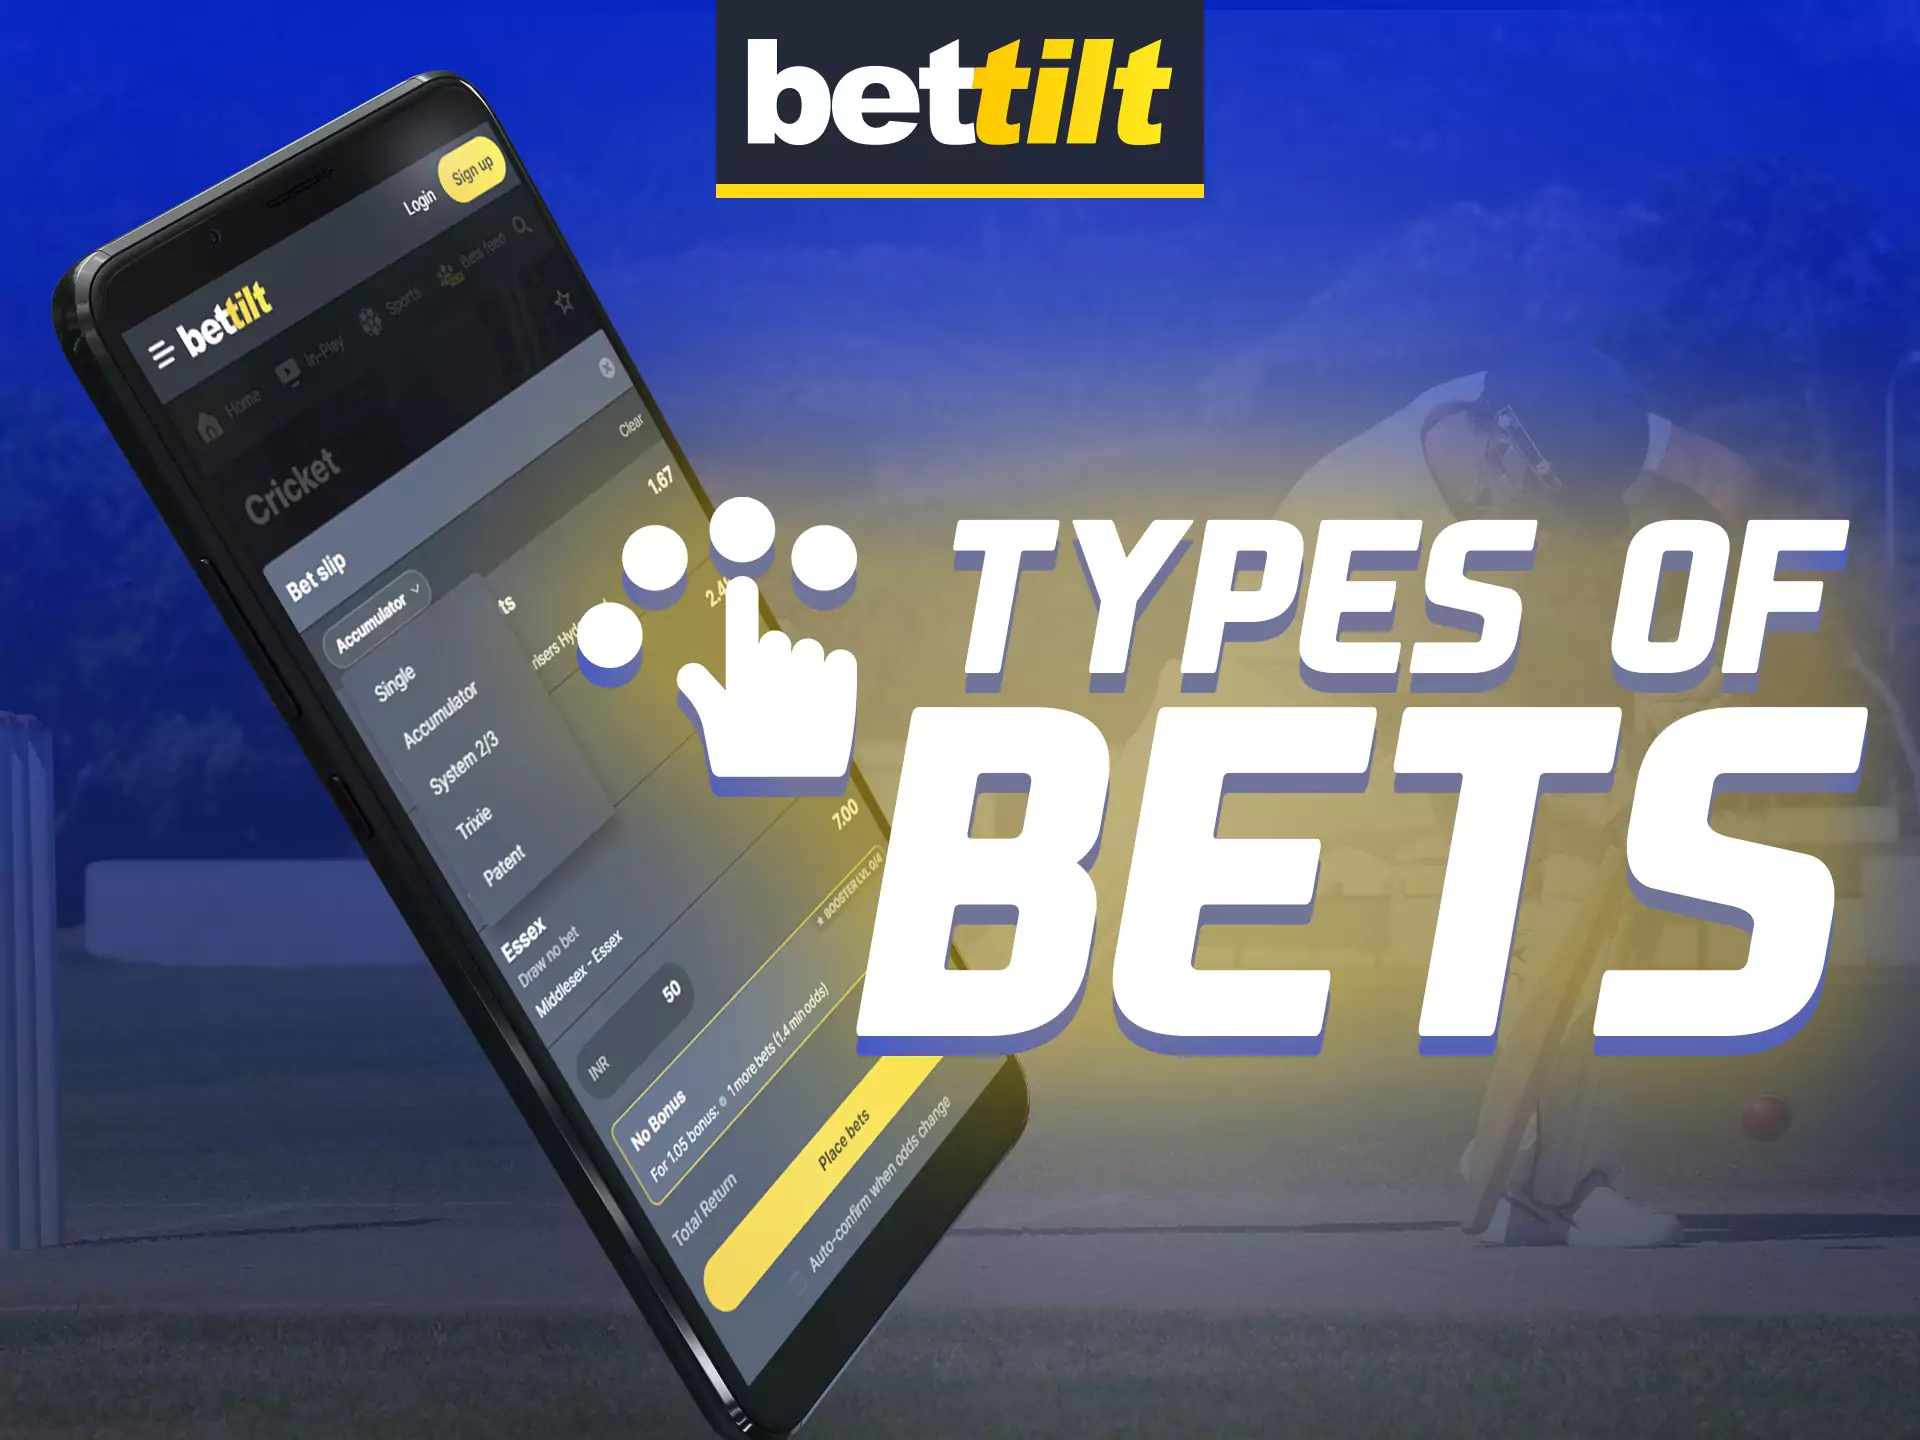 Try different types of sports betting in the Bettilt app.